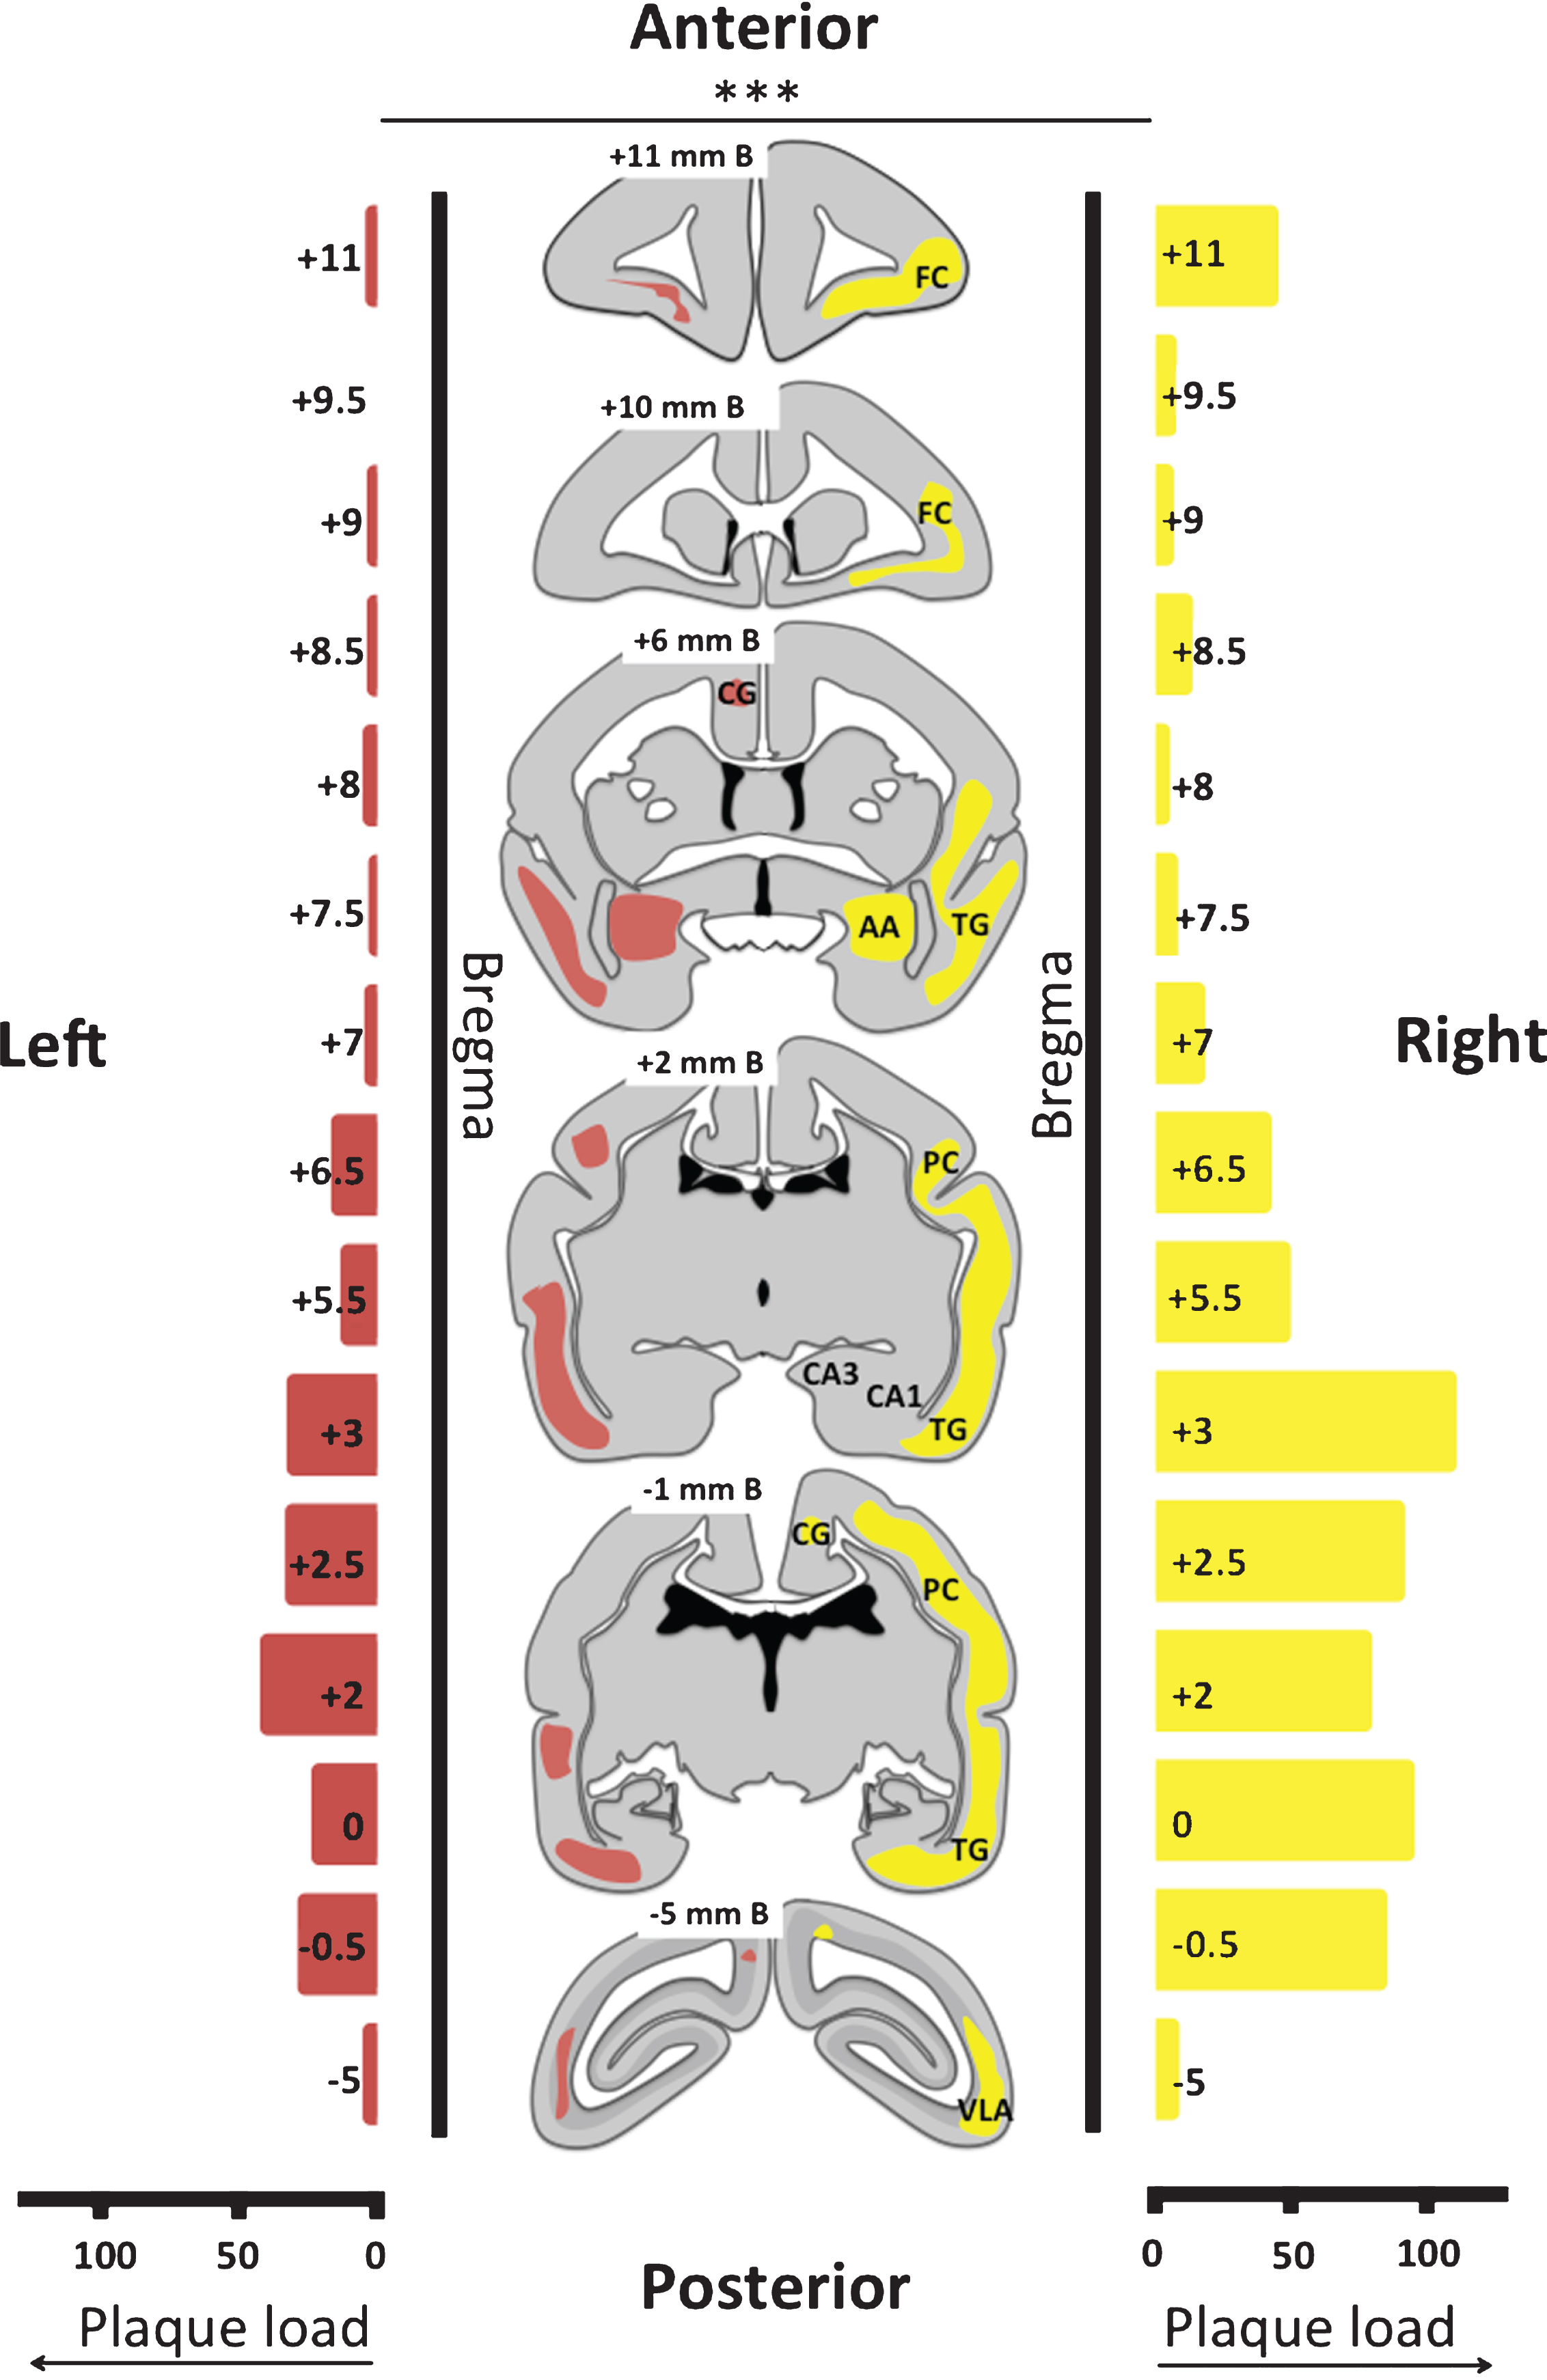 Plaque load and distribution throughout brain of monkey m9856. The distribution of the plaques is visualized on six transcranial sections and indicated in yellow in the right hemisphere and in red in the left hemisphere. The absolute plaque load of the right and left hemisphere on the sections analyzed are displayed on the left and the right side, respectively. The right demonstrated significantly more severe amyloidopathy than the left hemisphere (p < 0.001; Wilcoxon-signed-rank test). B, Bregma; FC, frontal cortex; CG, cingulate gyrus; AA, anterior amygdala; TG, temporal gyrus; PC, posterior cortex; CA3 & CA1, regions of hippocampus; VLA, ventrolateral anteriorextrastriate area.